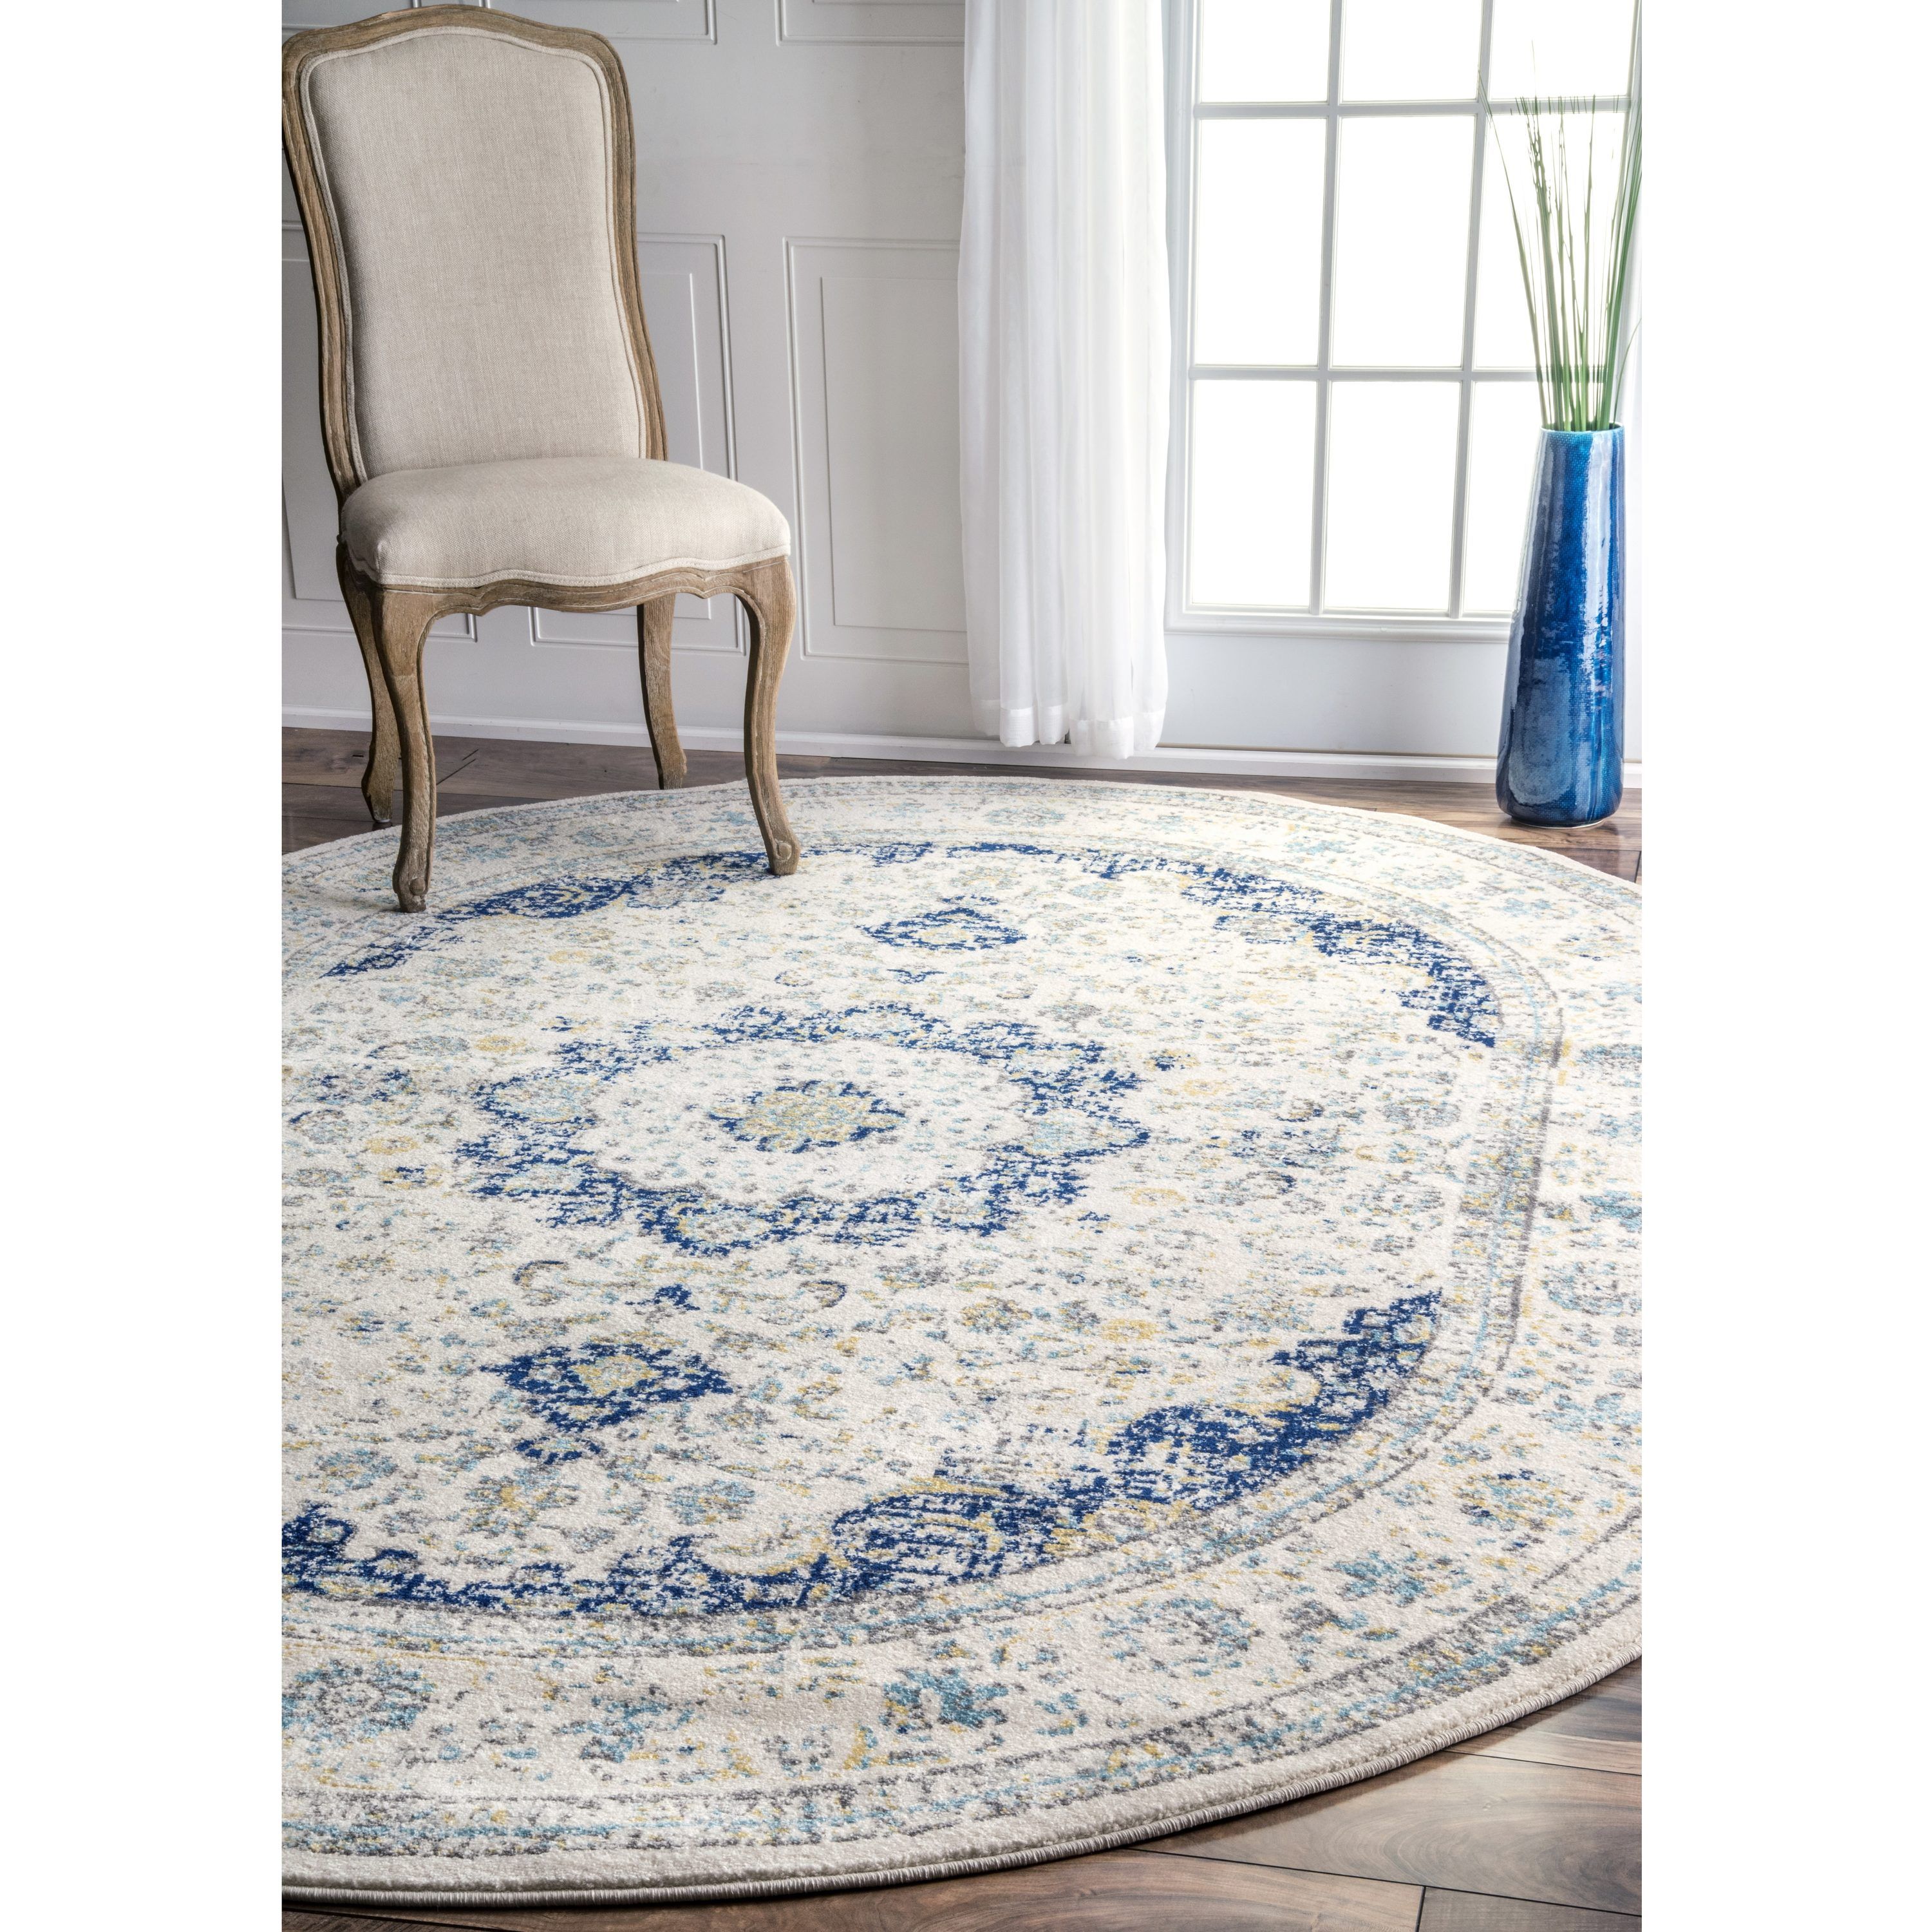 Nuloom 3 X 5 Blue Oval Indoor Distressed/Overdyed Area Rug In The Rugs  Department At Lowes Inside Blue Oval Rugs (Photo 5 of 15)